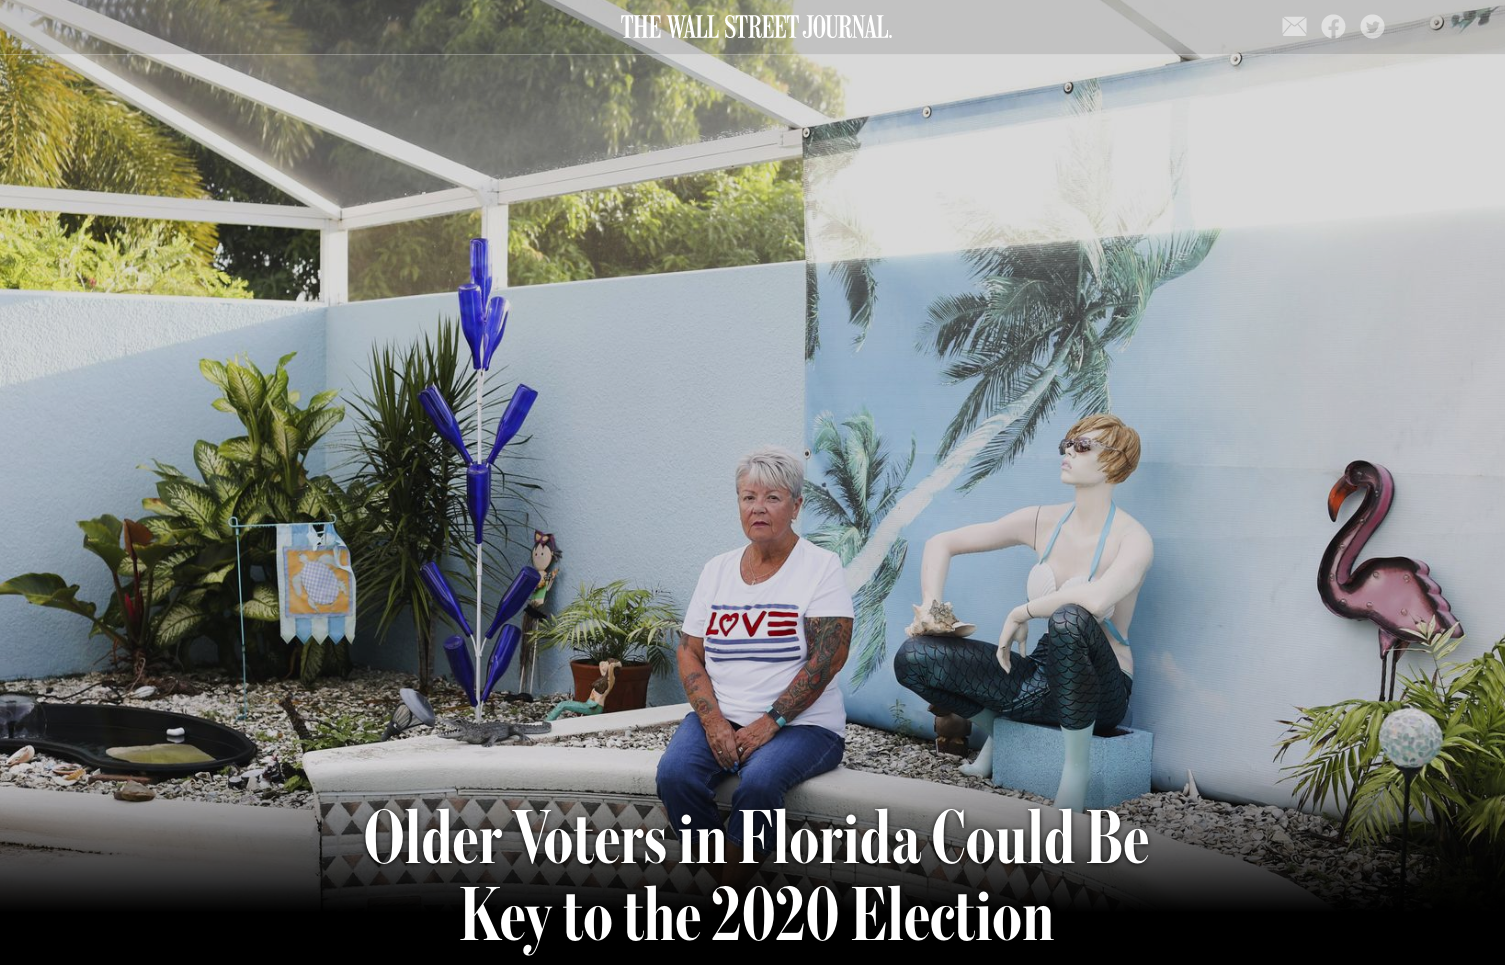  Photography: Eve Edelheit  Photo Editing: Ariel Zambelich  Story:  Older Voters in Florida Could Be Key to the 2020 Election  